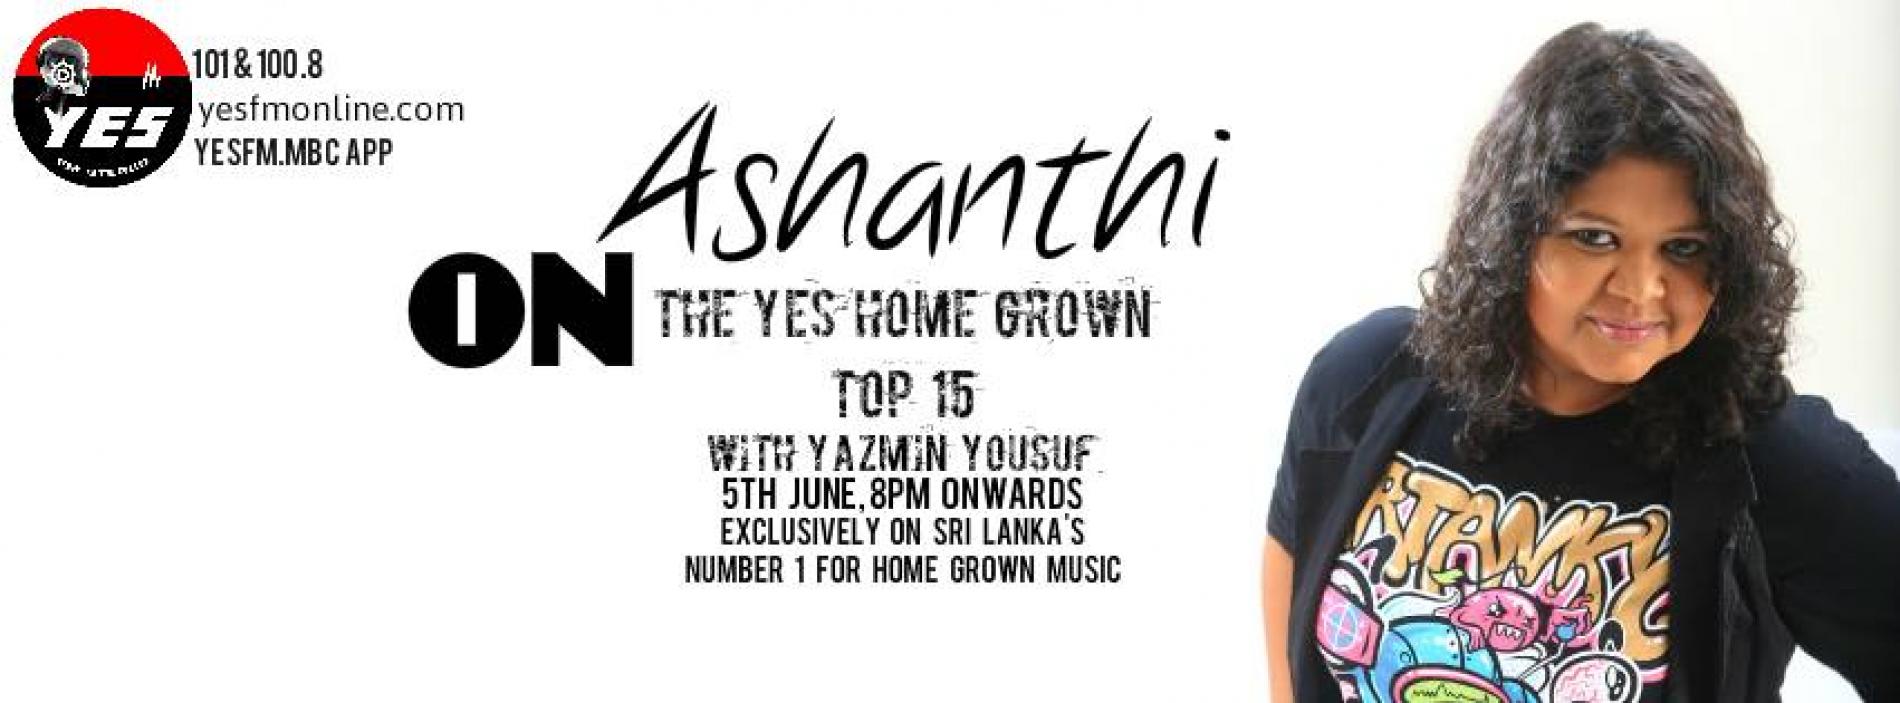 Ashanthi On The YES Home Grown Top 15